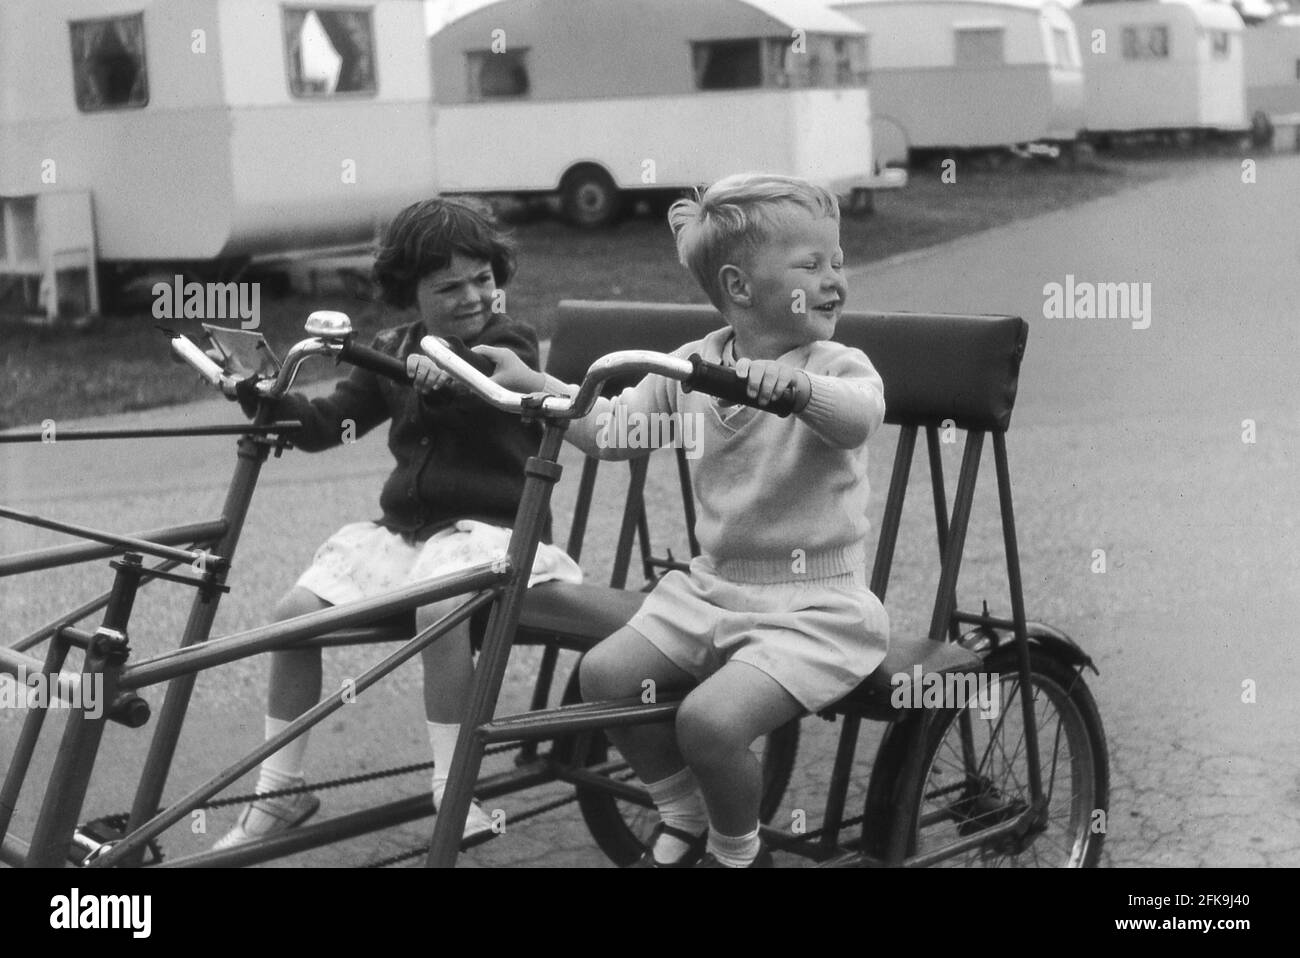 1964, historical, outside on a path at a holiday caravan park, a young boy with his little sister, sitting on a large metal framed 'holiday camp' twin or two seater bicycle, Suffolk, England, UK. These double seater bicycles were great fun and a good way of moving around the site on the wide paths. Stock Photo